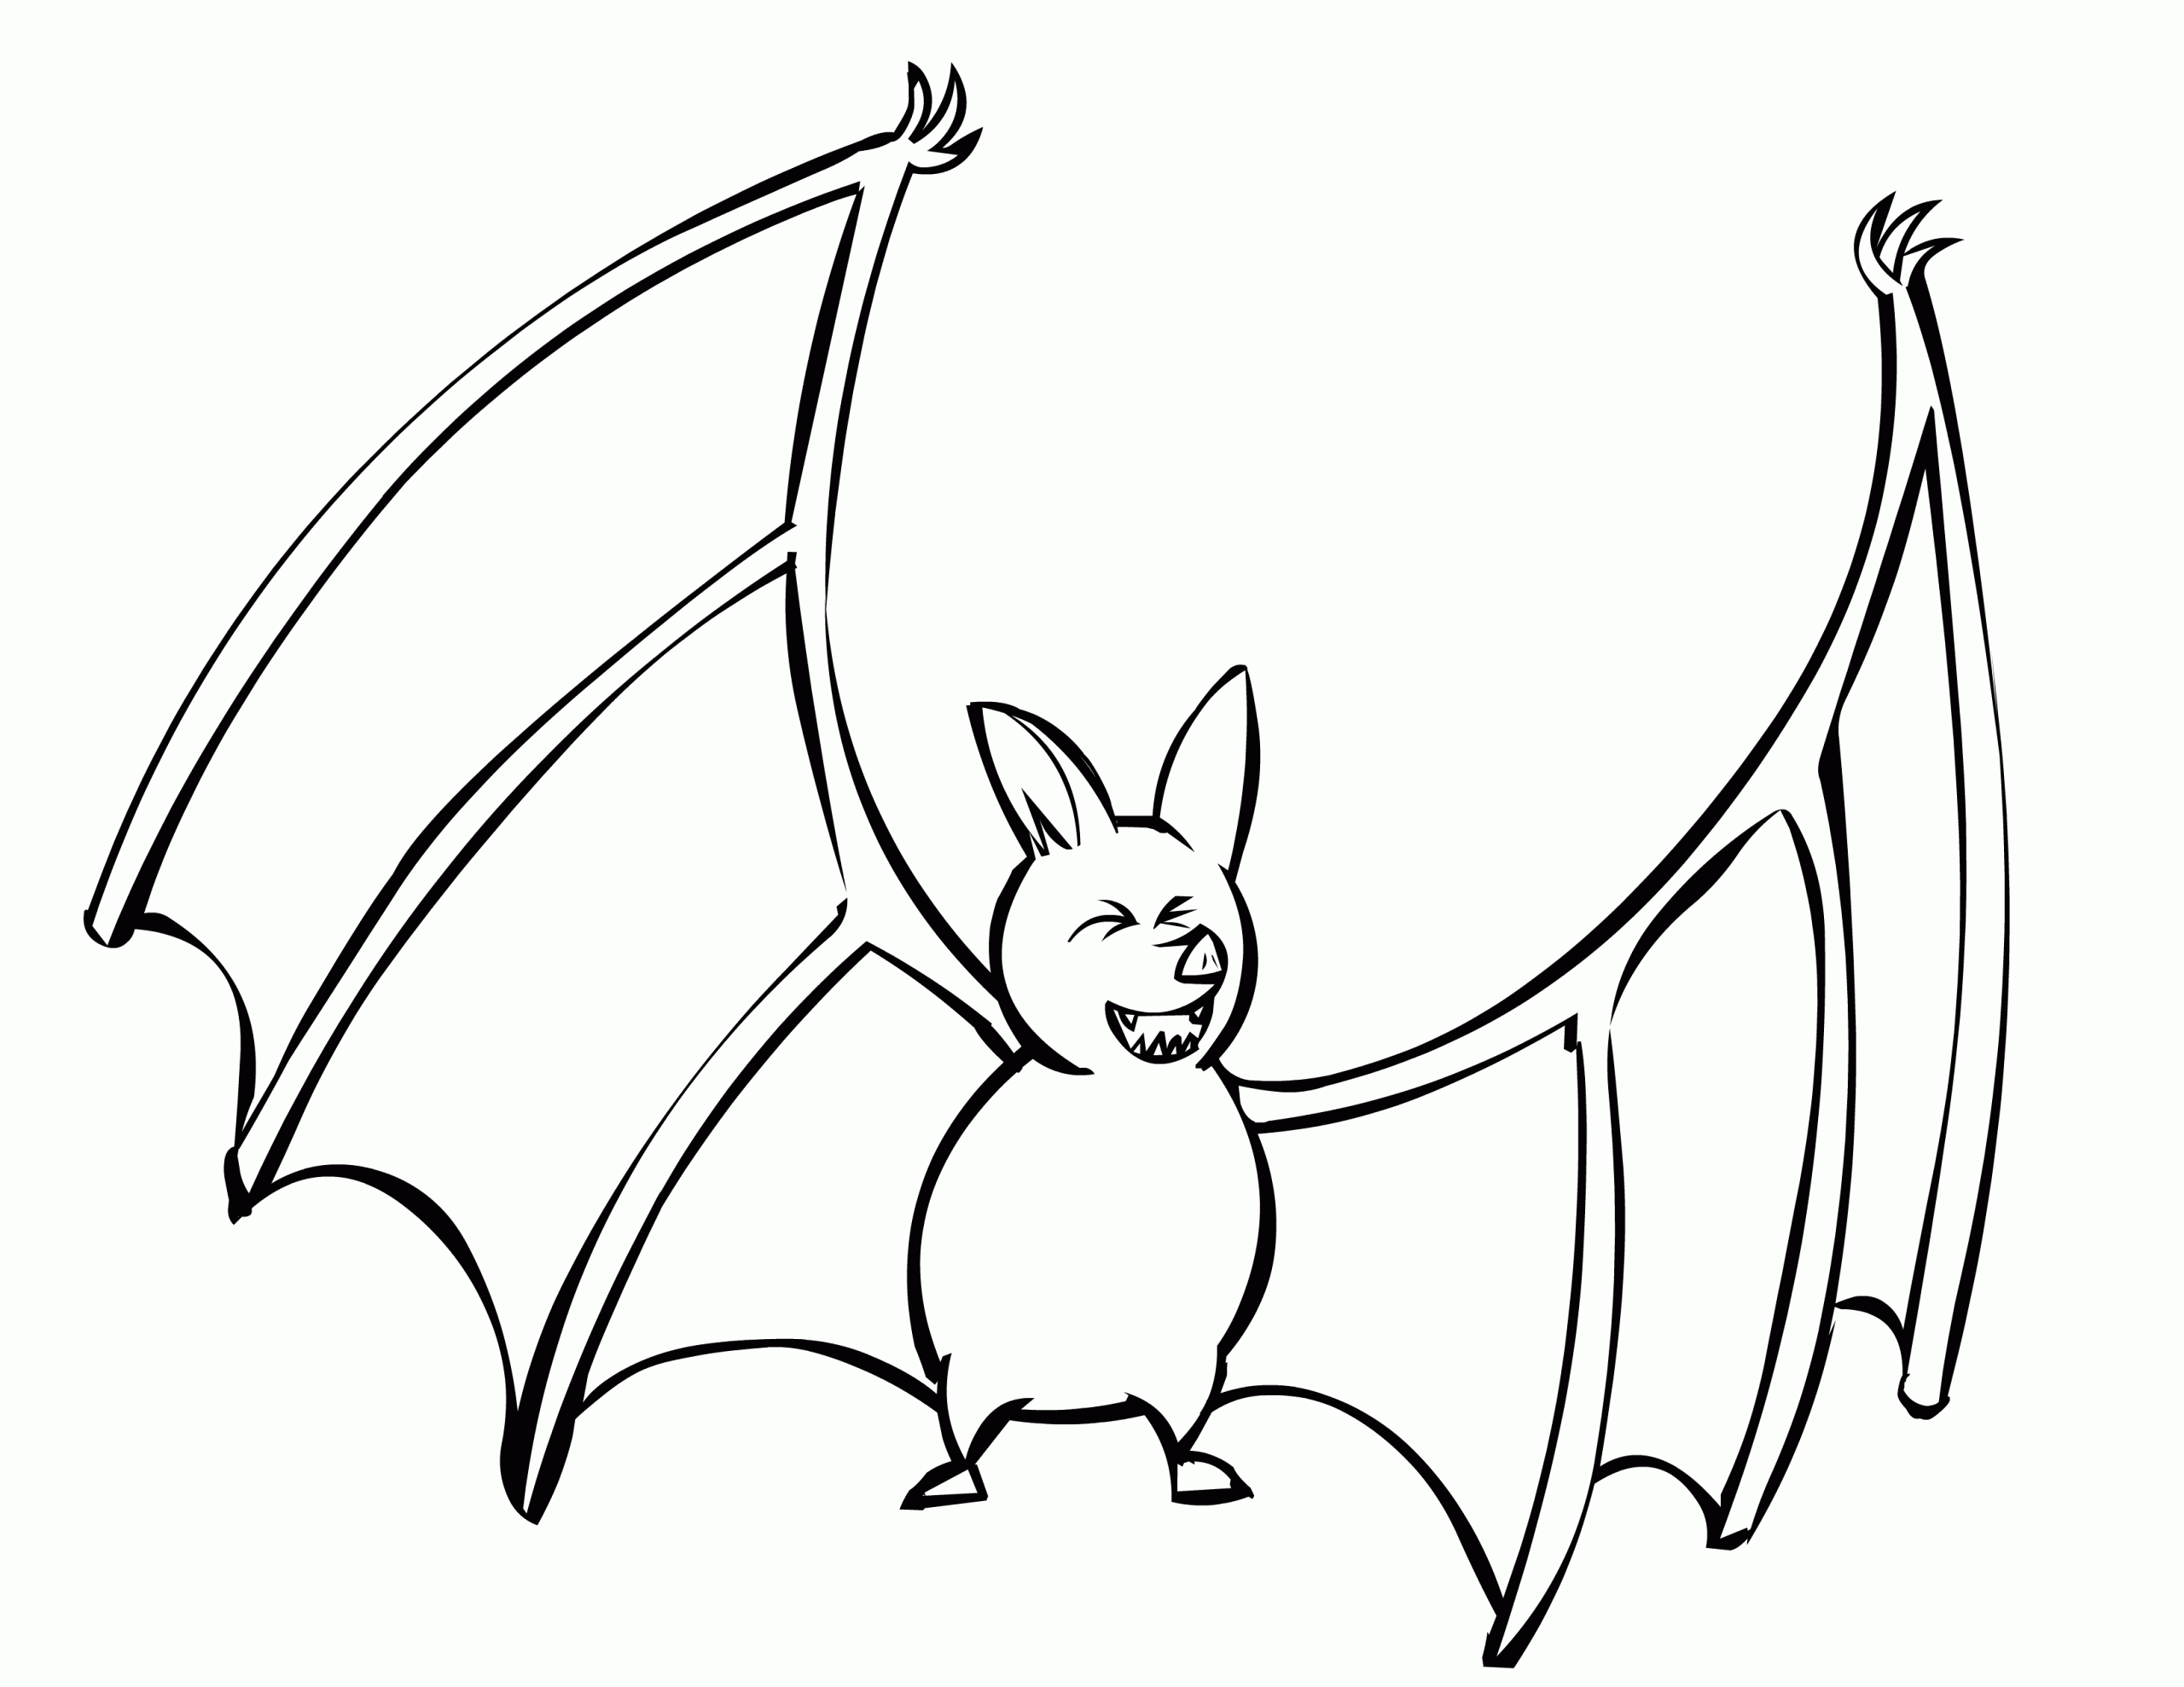 Bat Coloring Page For Us